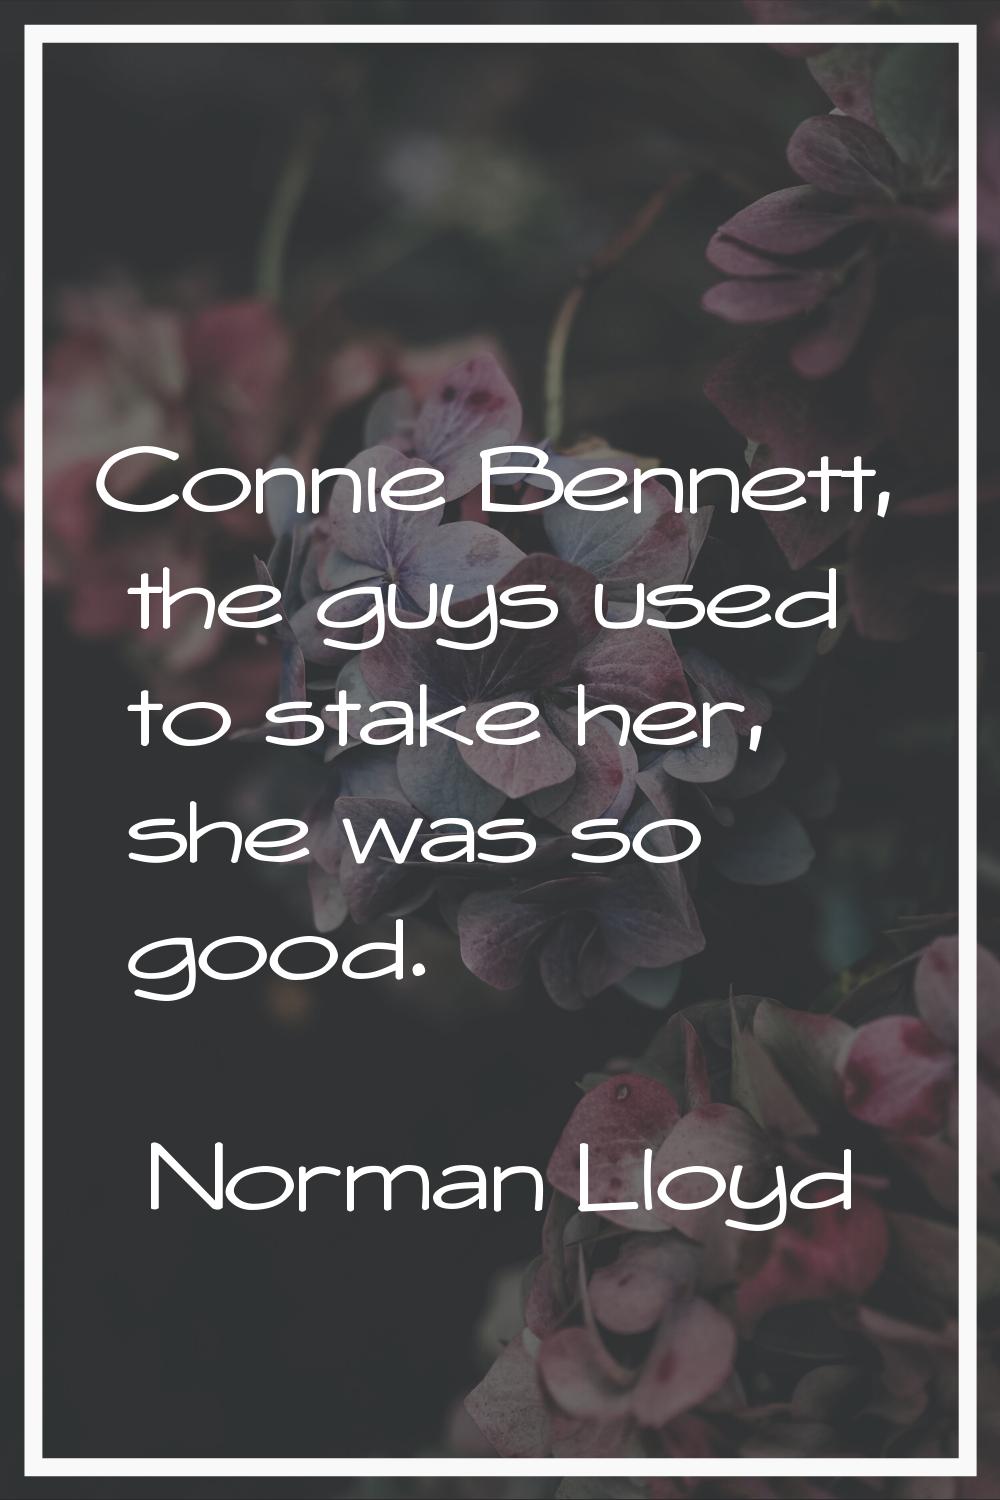 Connie Bennett, the guys used to stake her, she was so good.